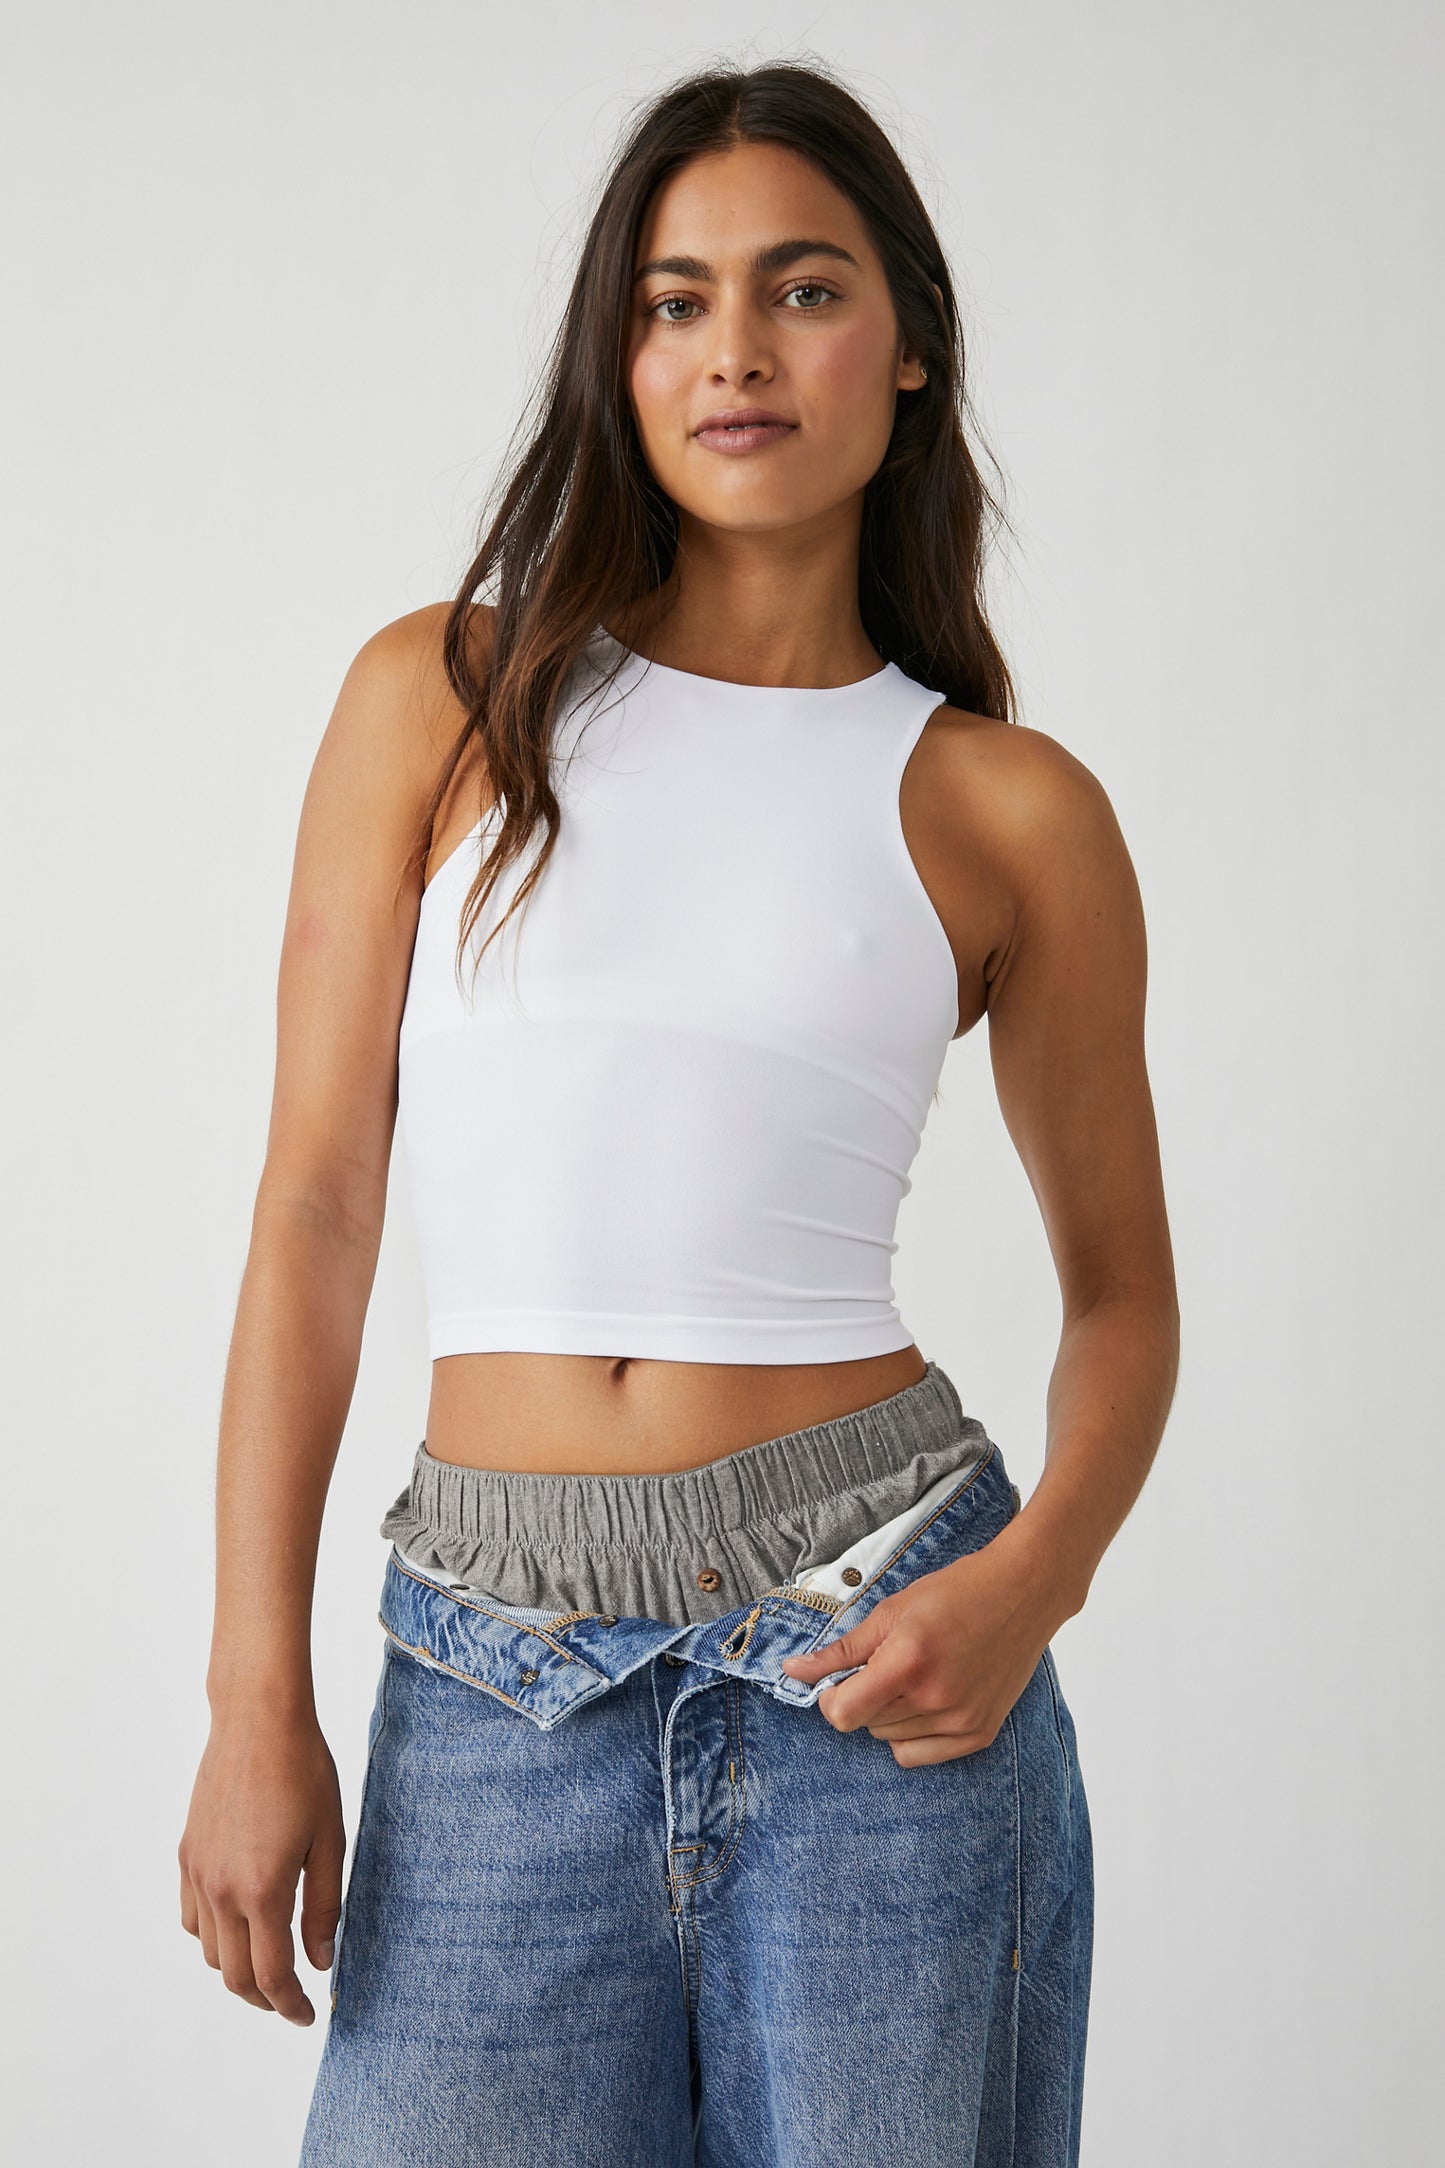 Clean Lines Cami - high neck